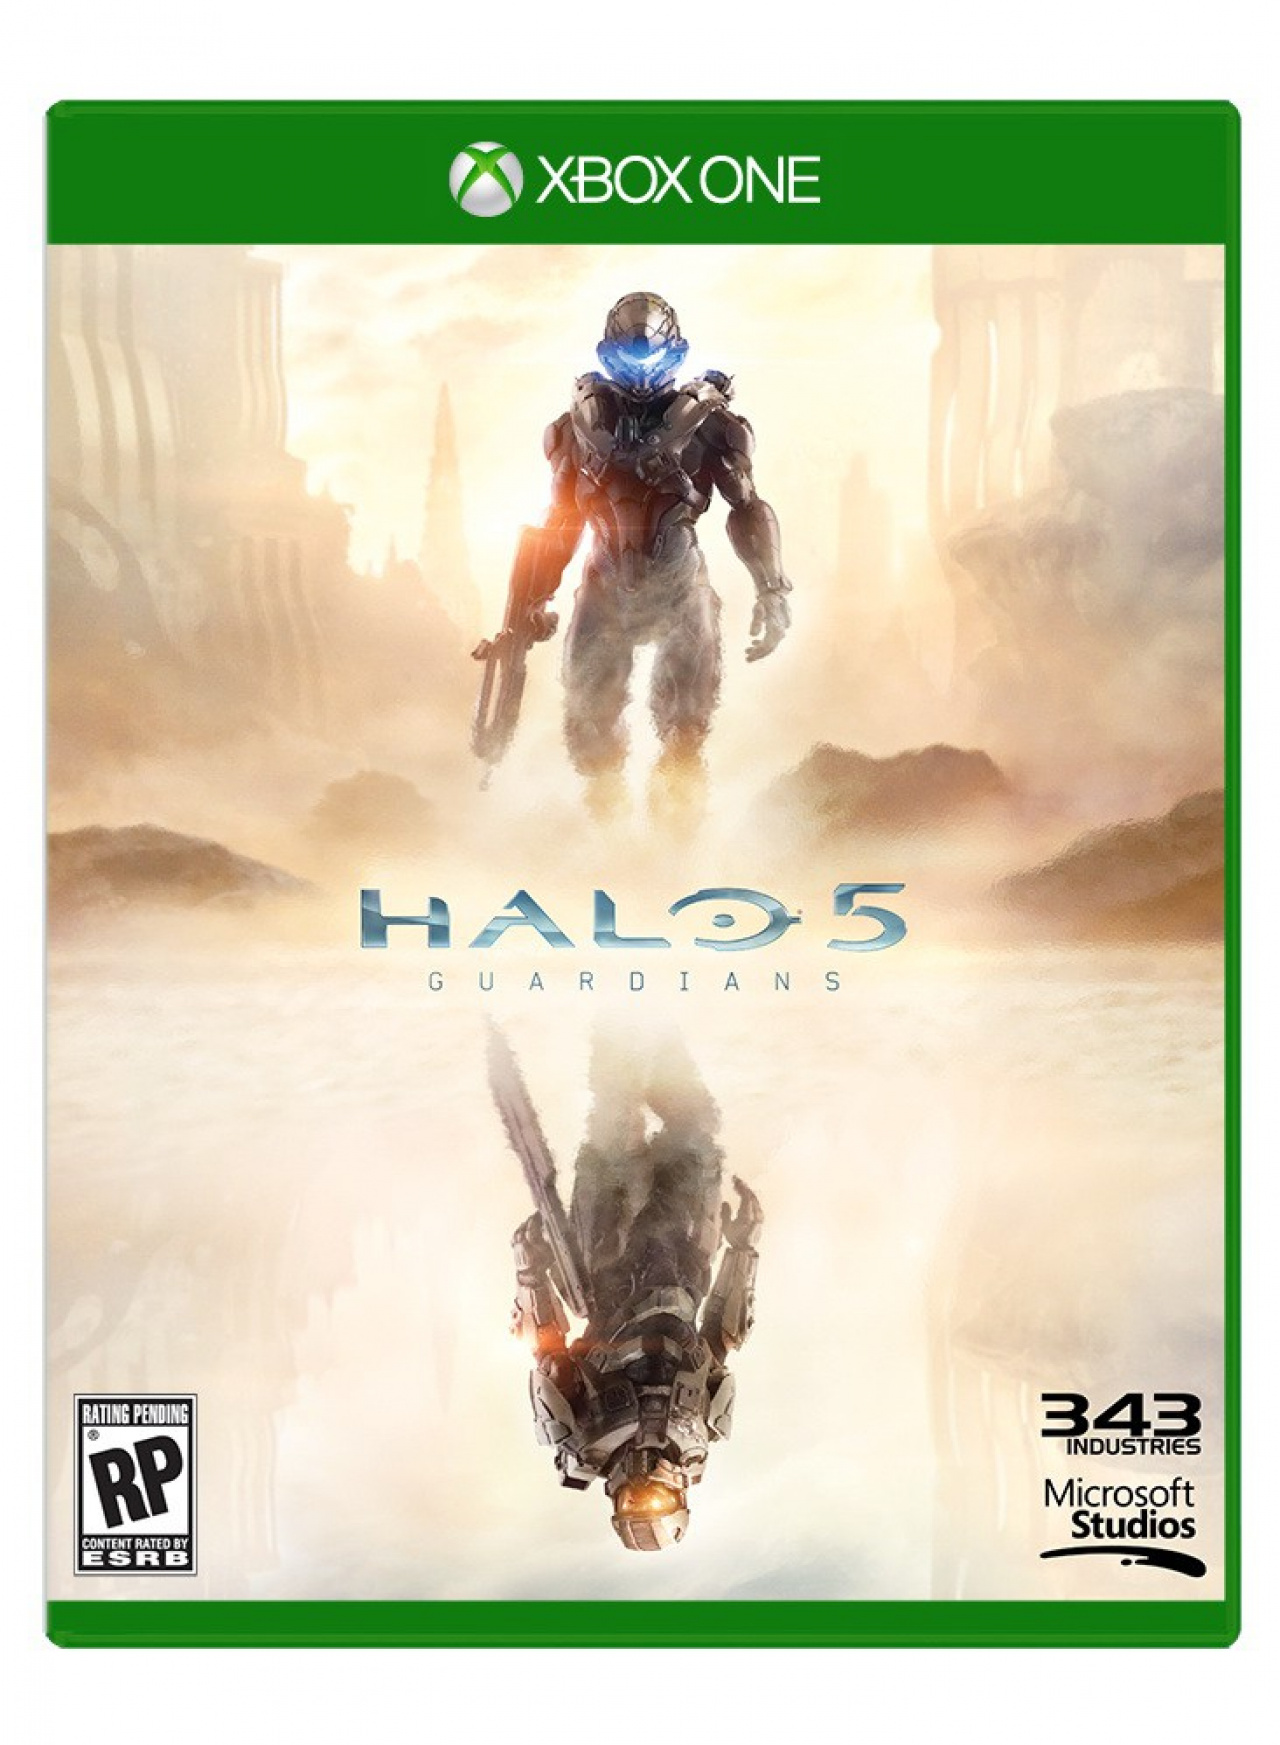 Halo 5: Guardians | Video Game Reviews and Previews PC, PS4, Xbox One ...